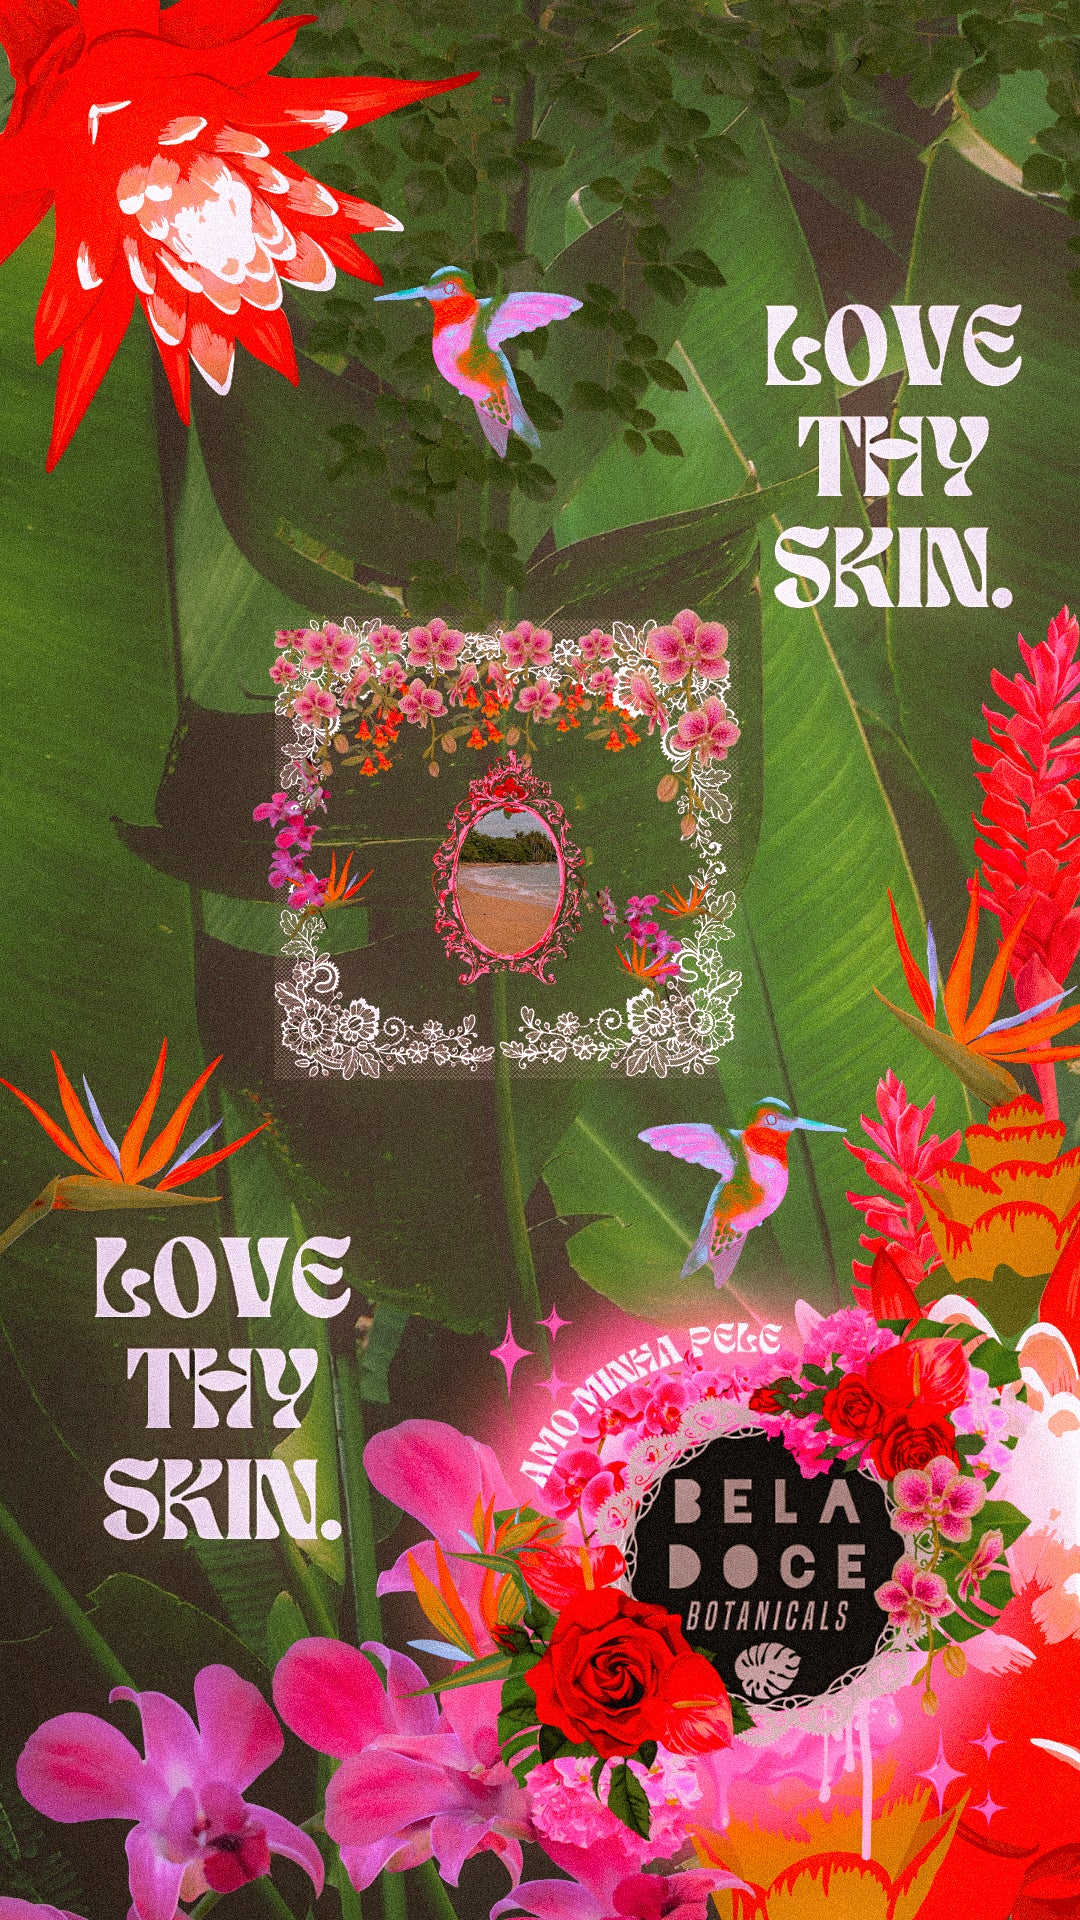 Beladoce Botanicals®️ banana leaf orchid white crochet white lace palm leaf orchid and emerald aesthetic collage of tropical landscape. Pink and fuschia antique style frame around text. Text reads: “love thy skin”